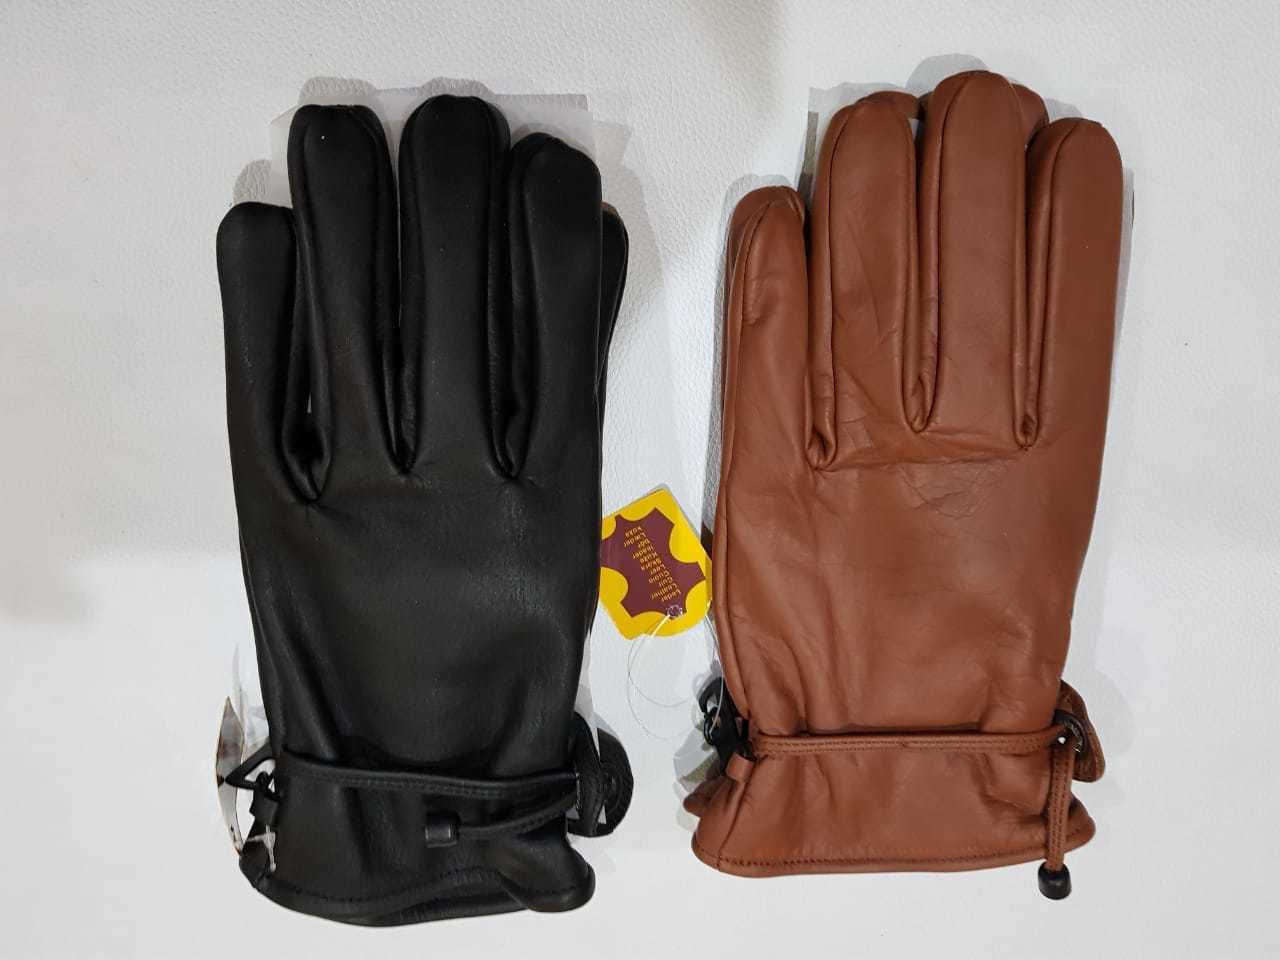 Genuine Leather Riding/Driving gloves